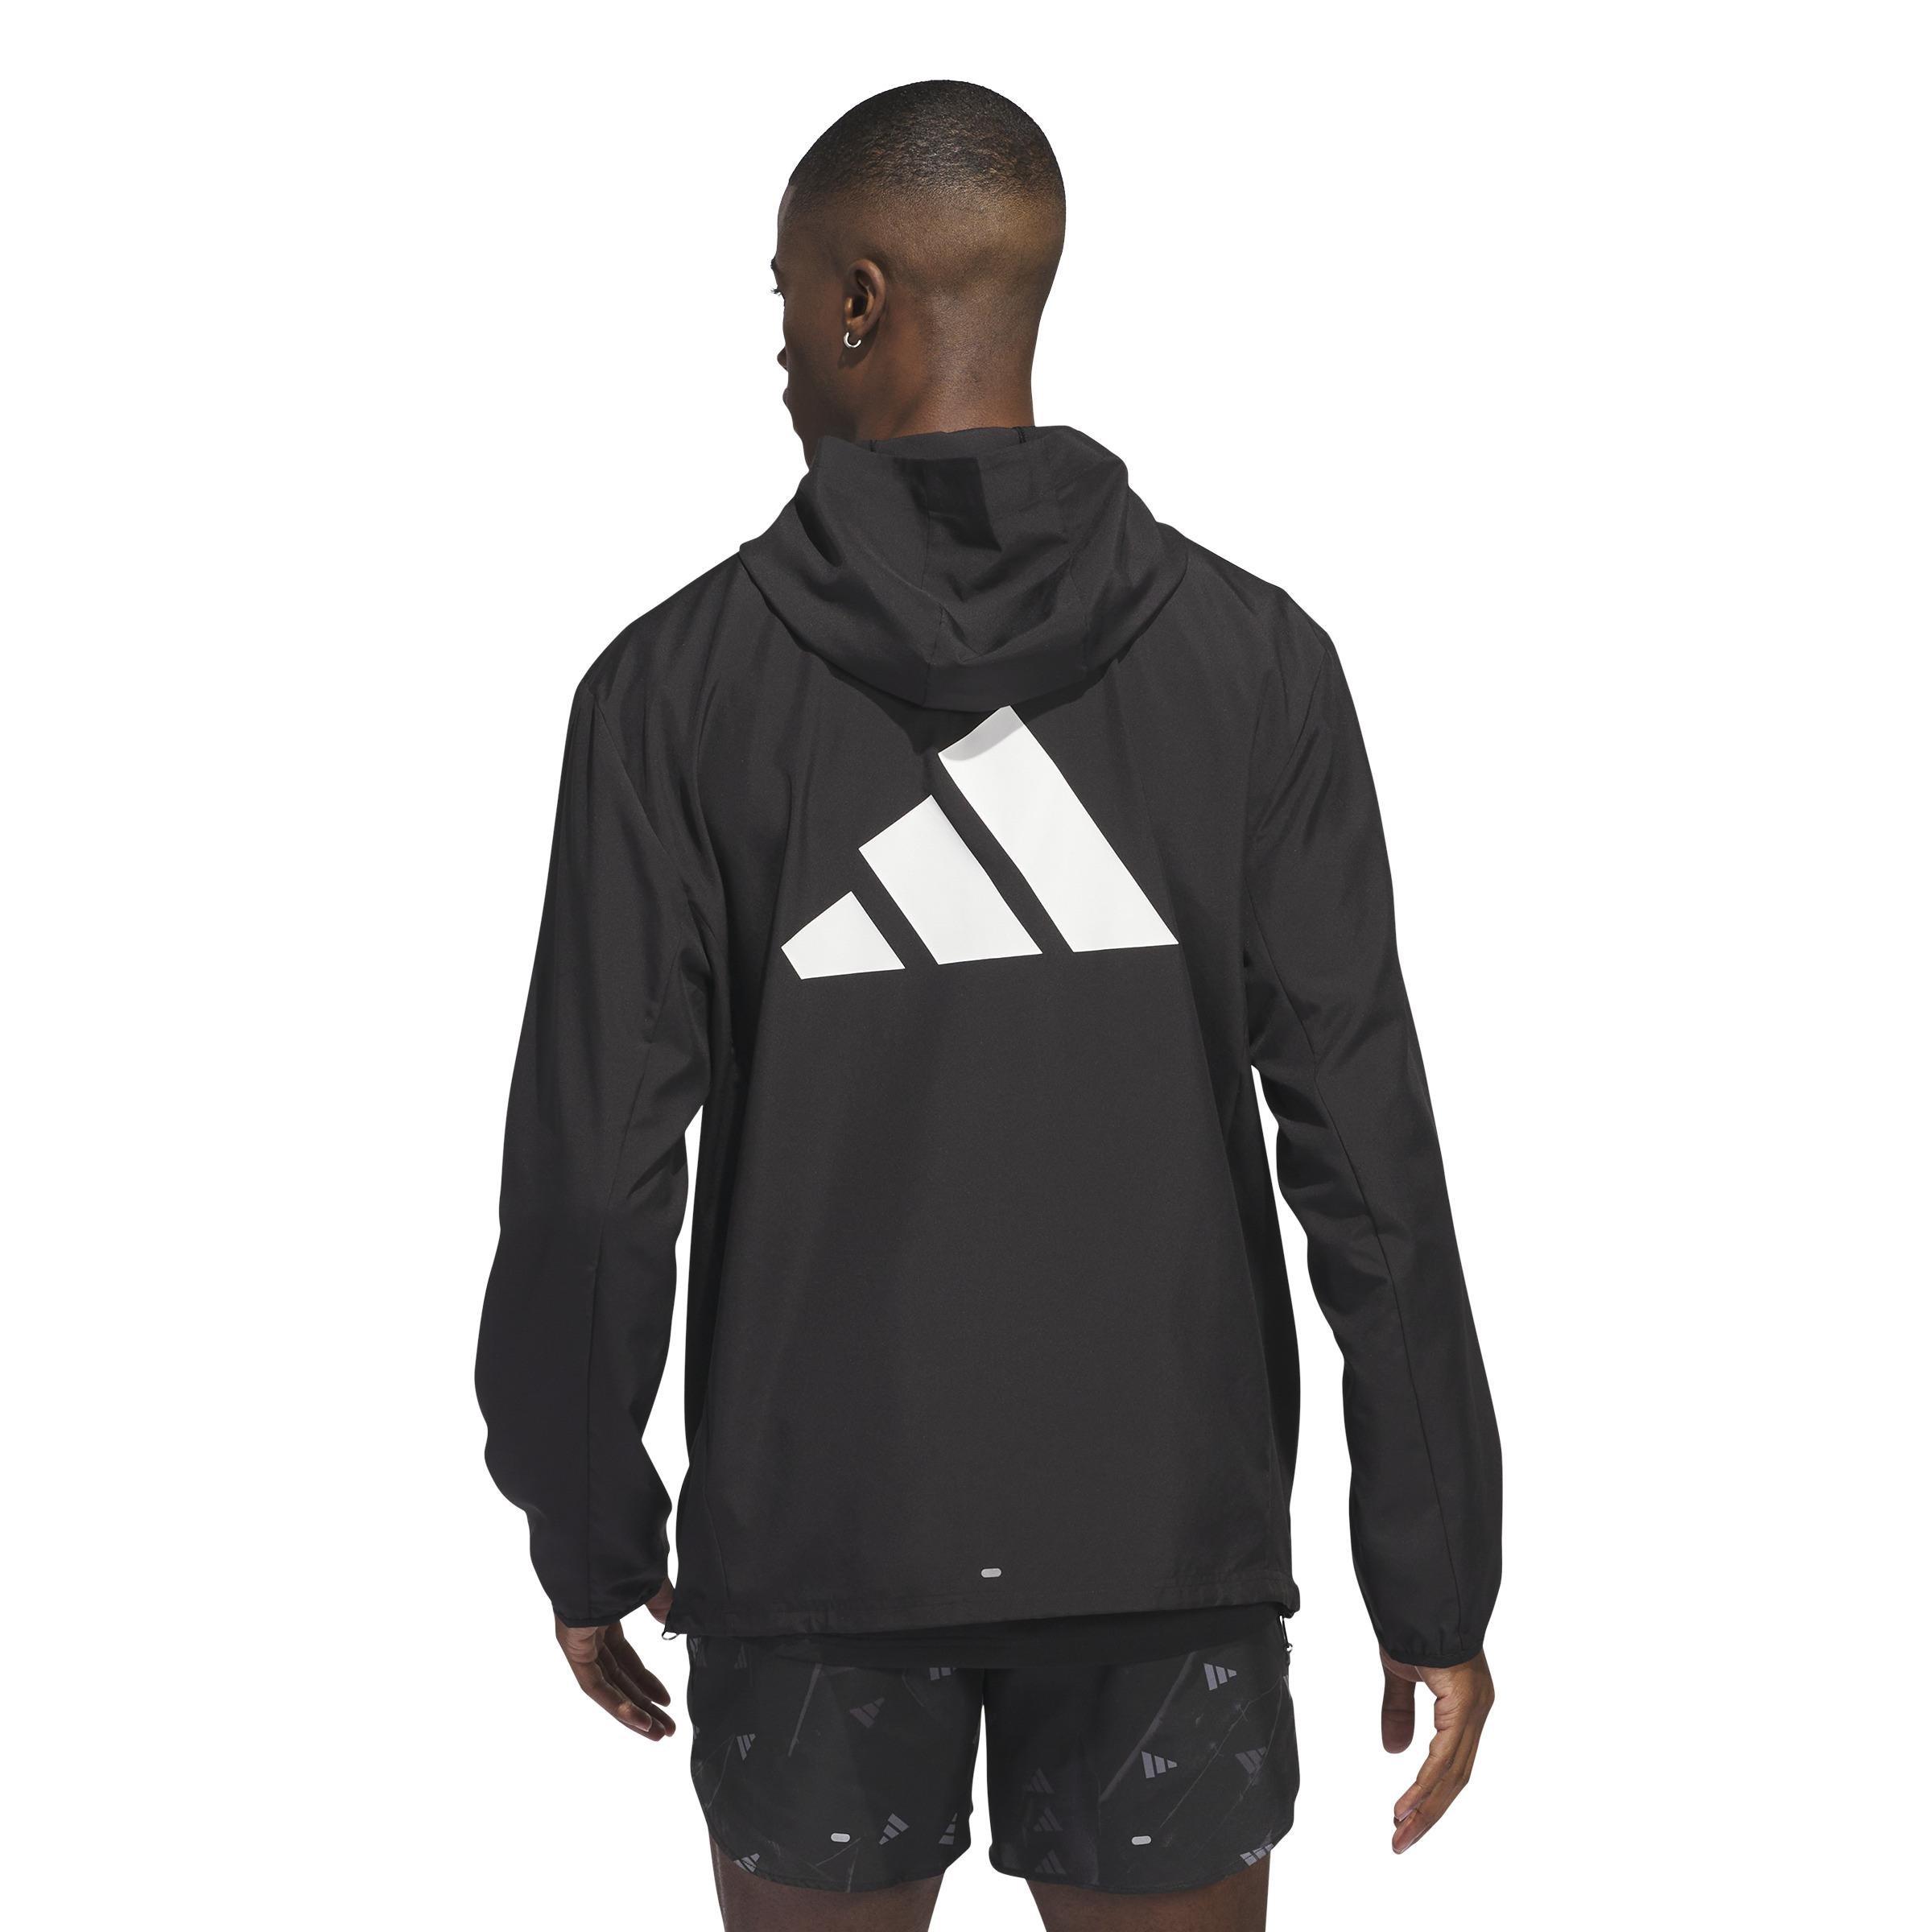 Run It Jacket BLACK Male Adult, A701_ONE, large image number 2